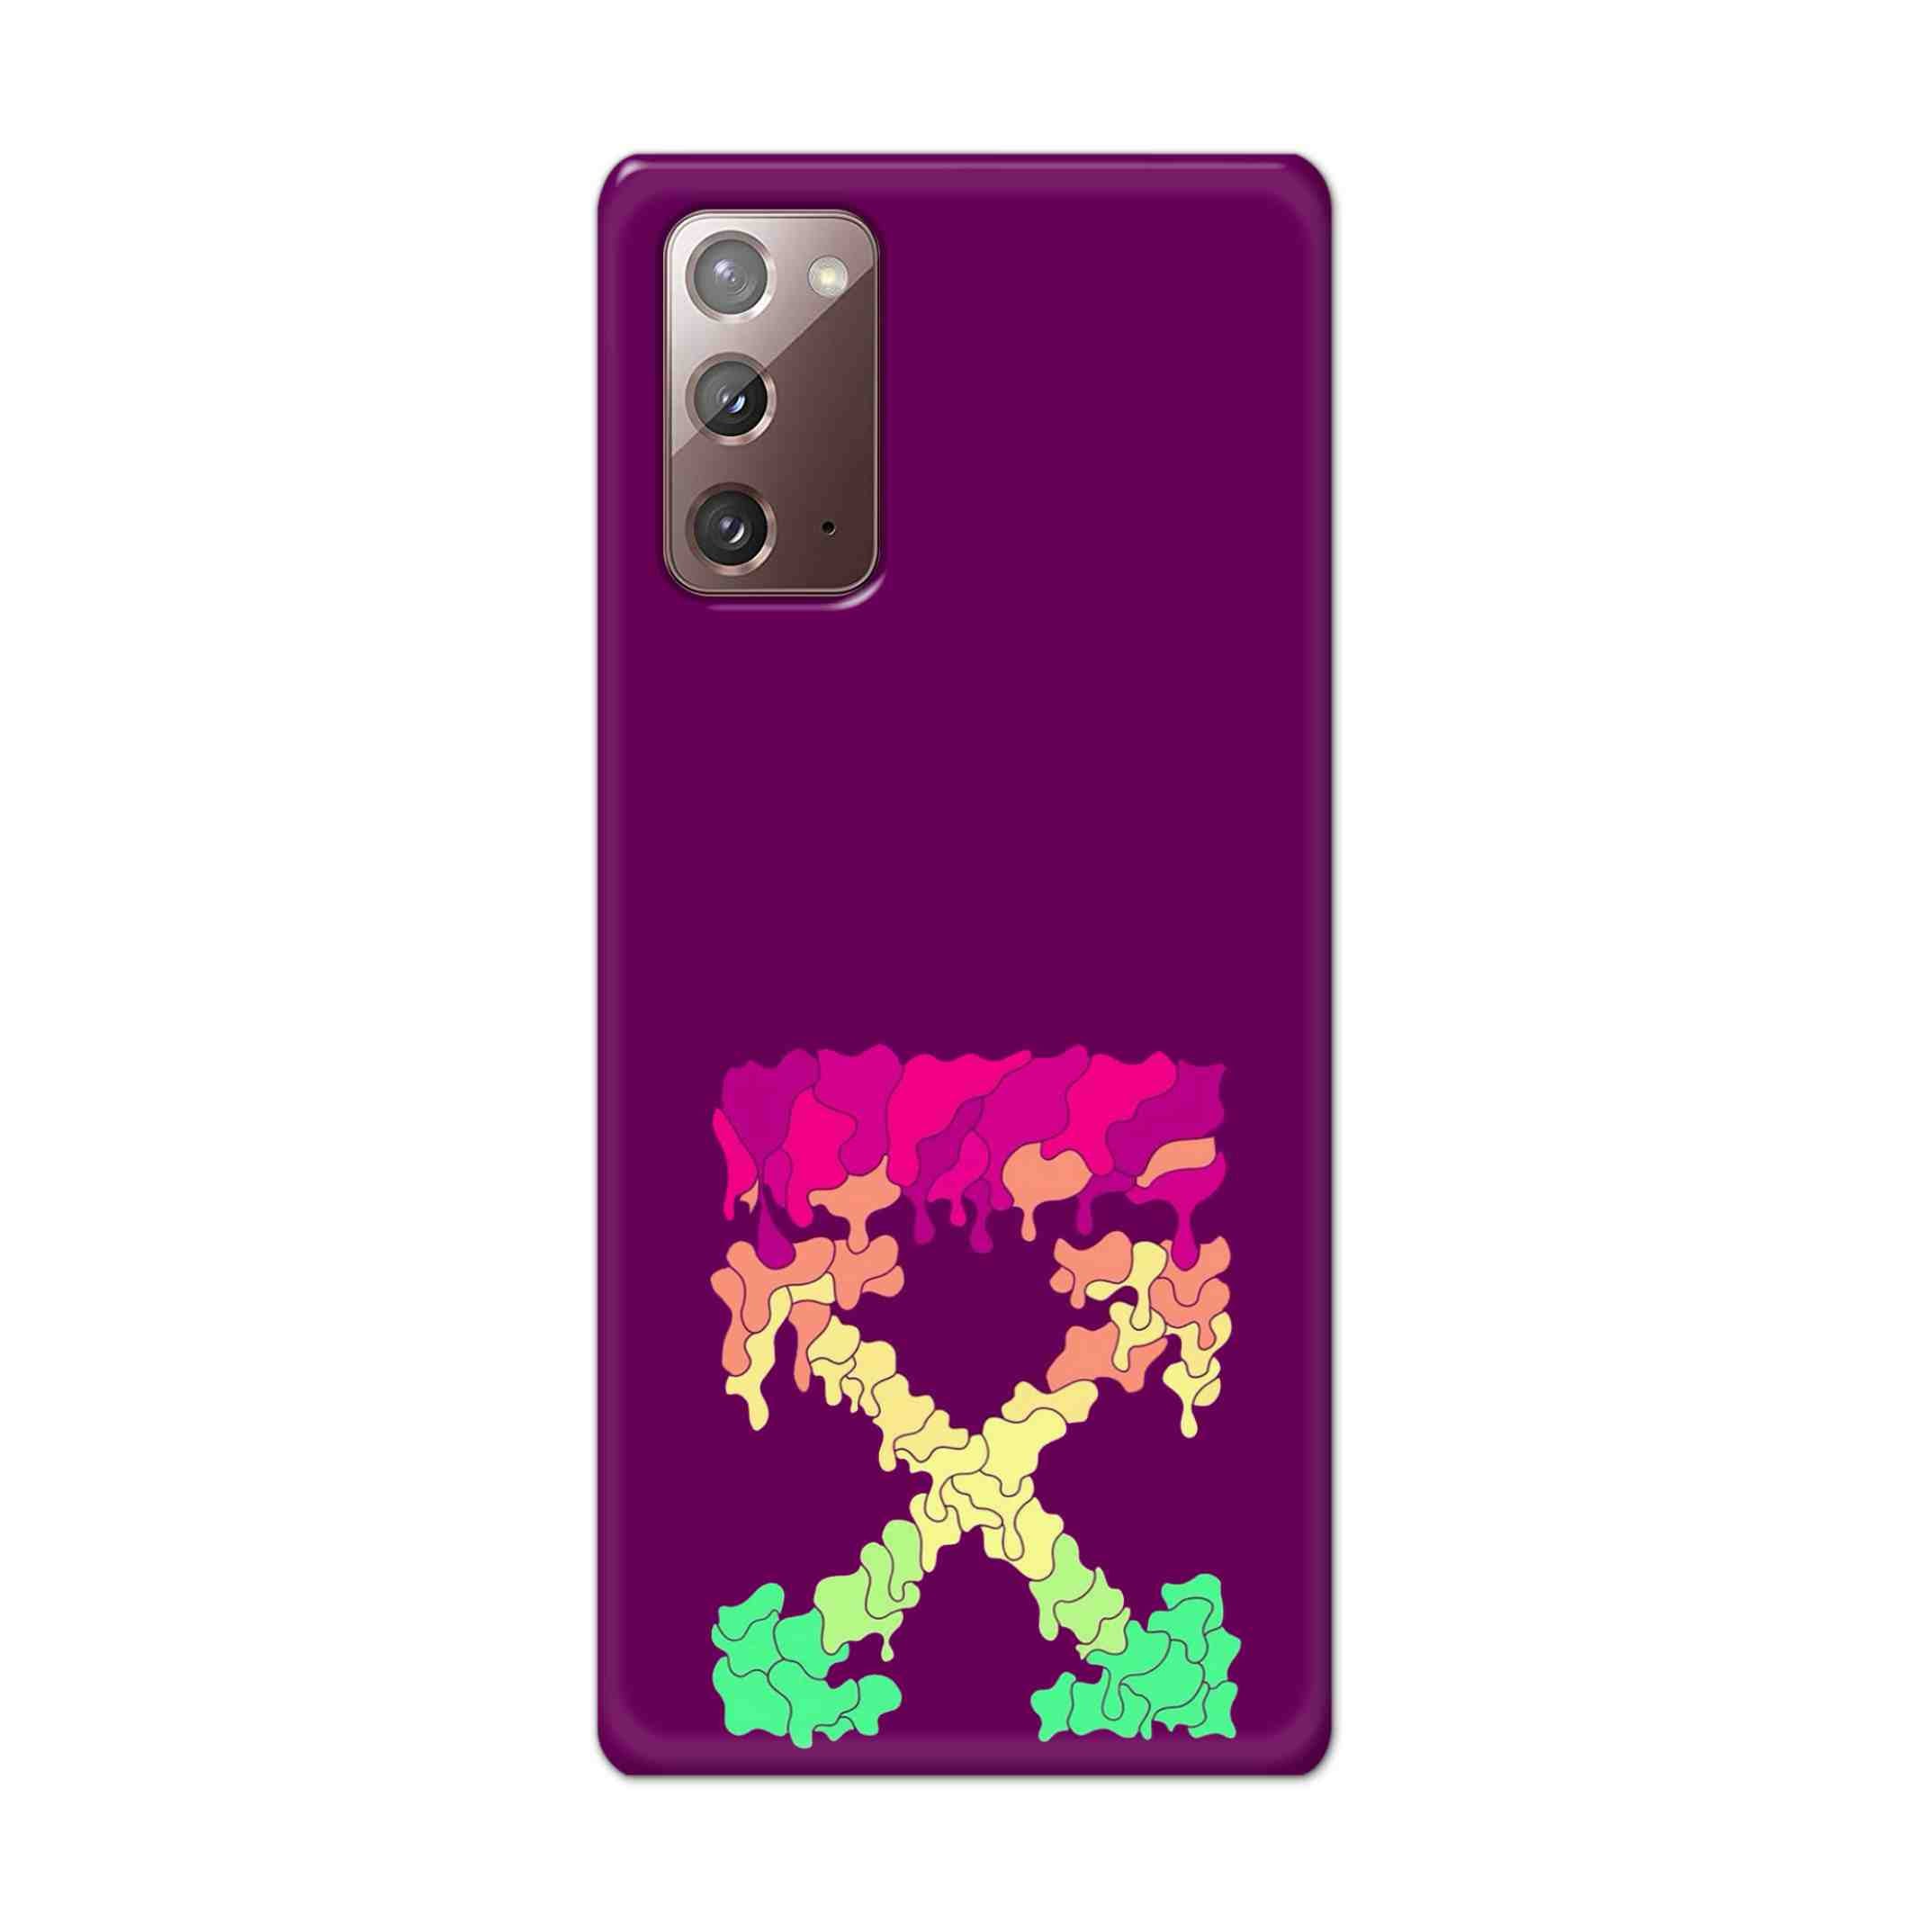 Buy X.O Hard Back Mobile Phone Case Cover For Samsung Galaxy Note 20 Online